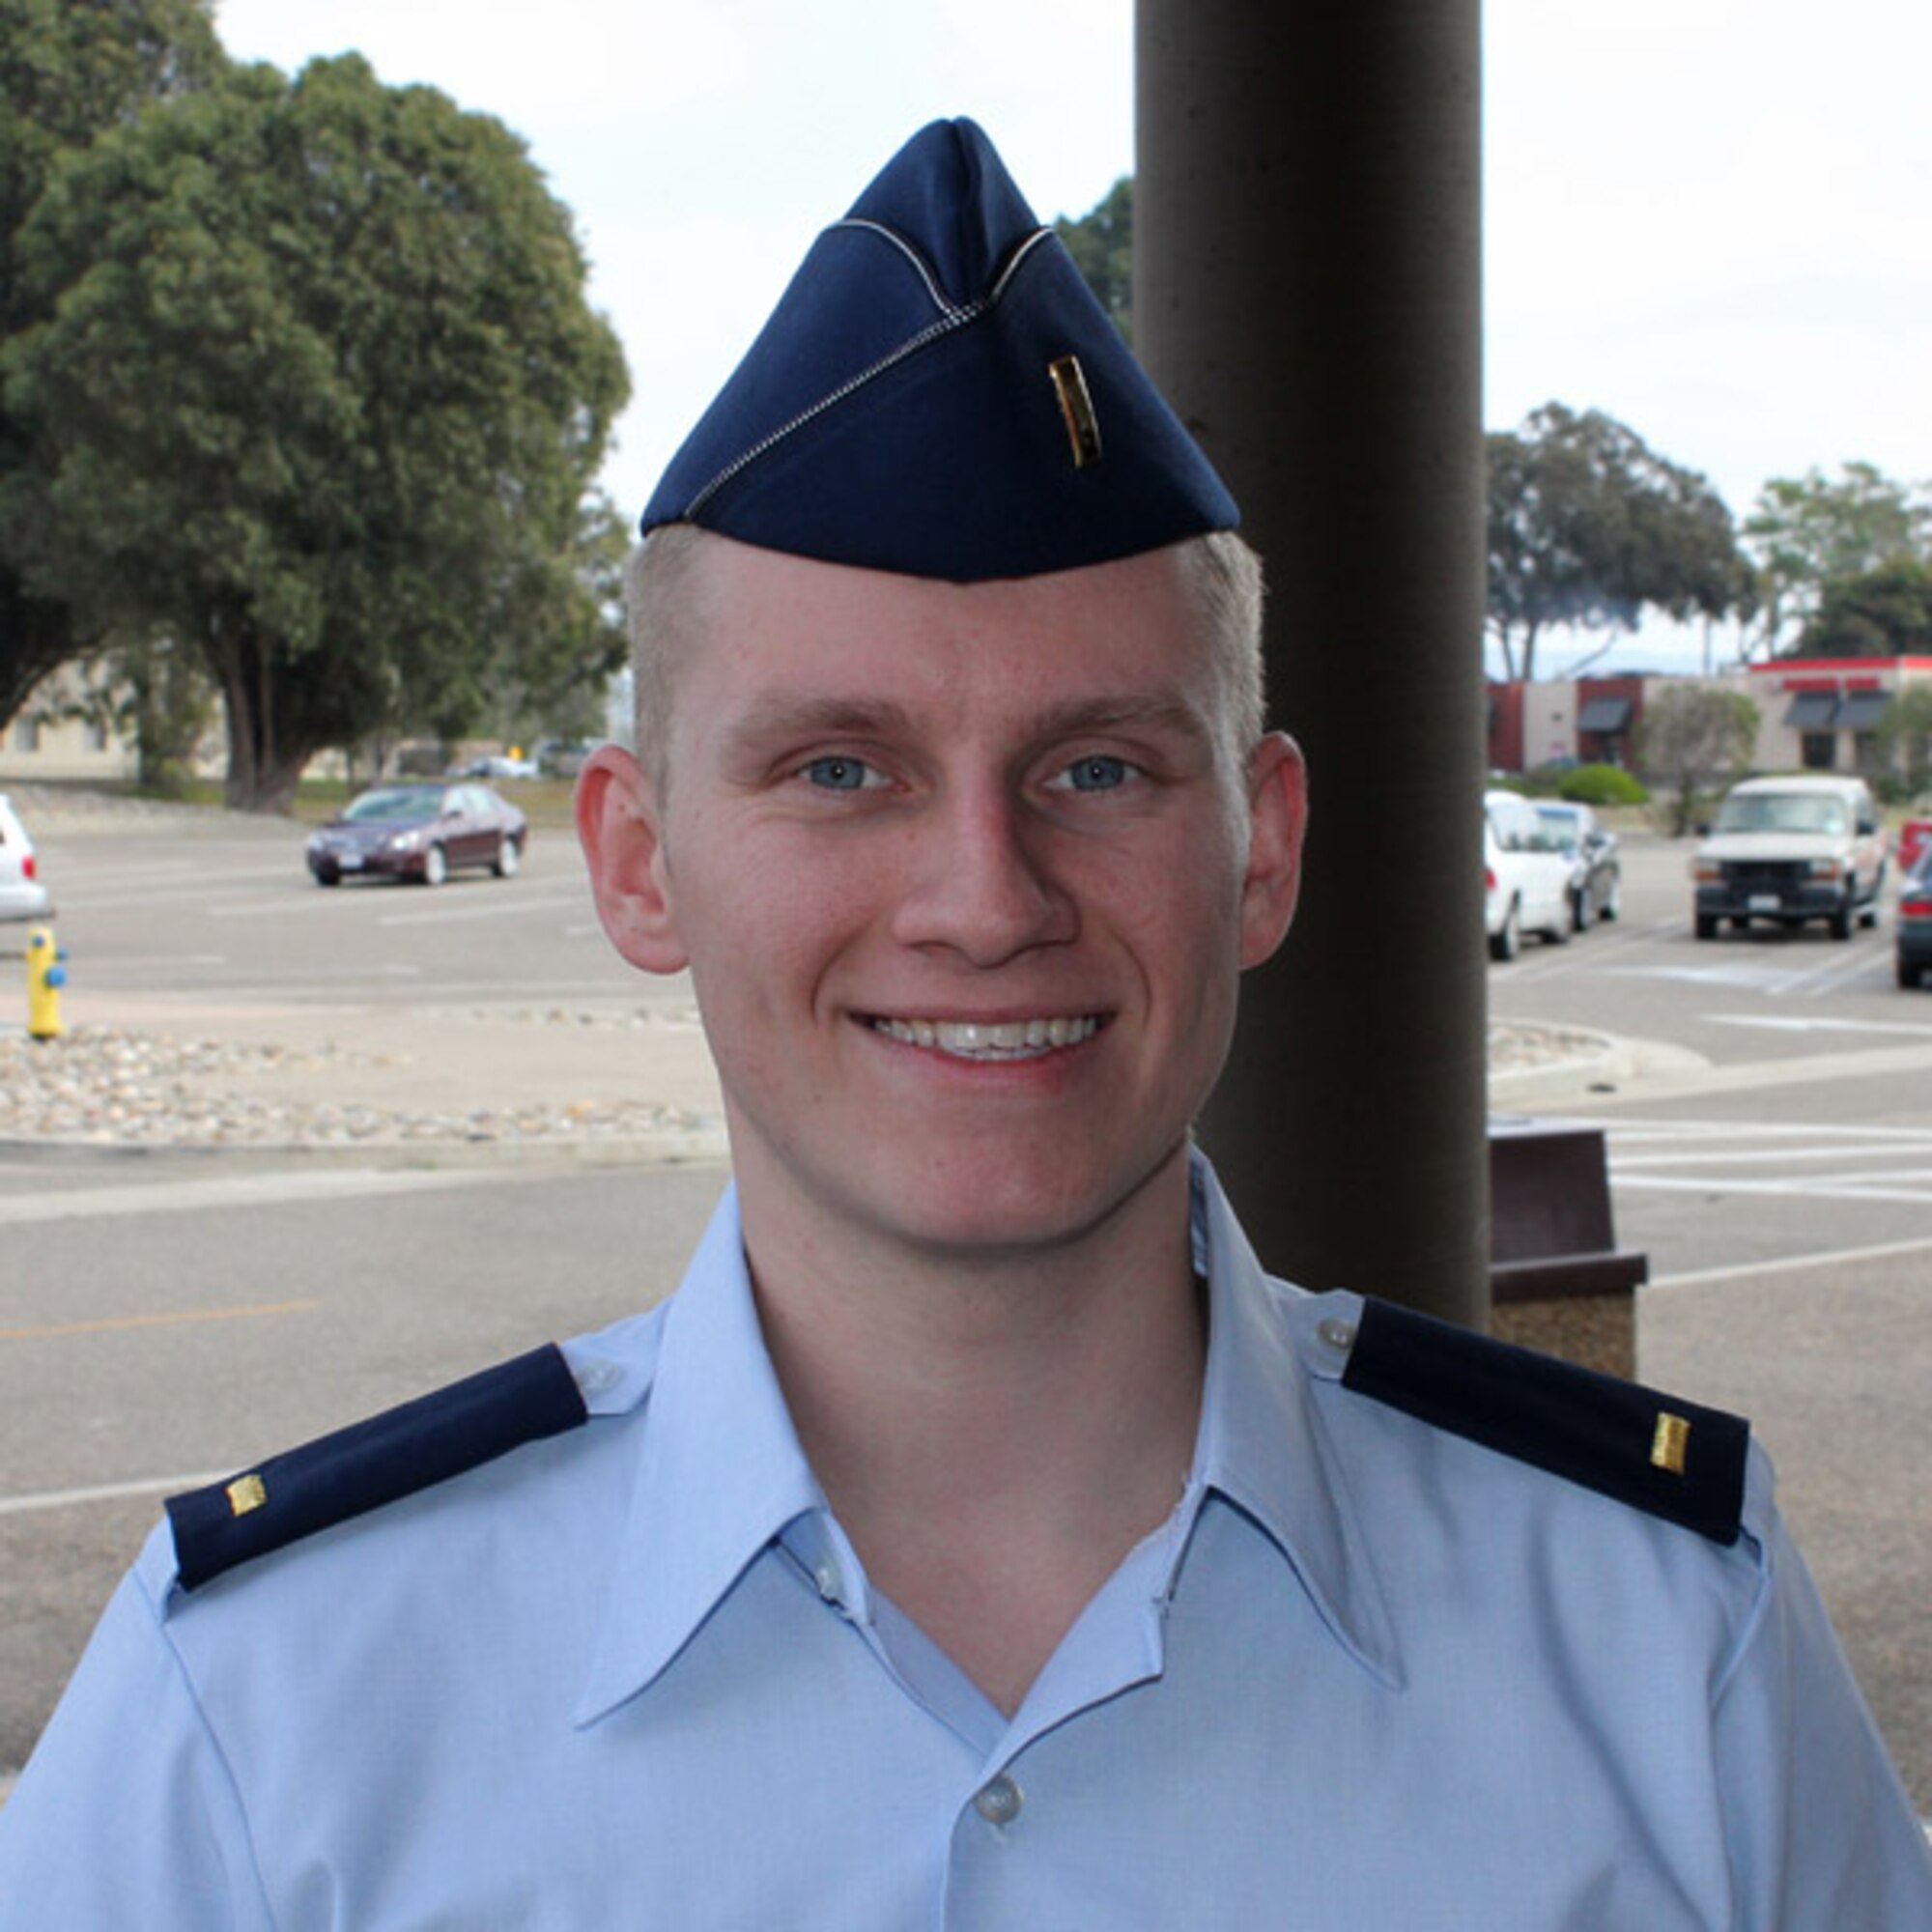 VANDENBERG AIR FORCE BASE, Calif. --  2nd Lt. John Boylson, 532nd Training Squadron student: Q: What are you most thankful for this year? A: "My family and friends." Q: Favorite part of your holiday meal? A: "Pumpkin Pie" Q: Did you do any Black Friday shopping? A: "No, I used to work in retail, so I would rather do my shopping online."